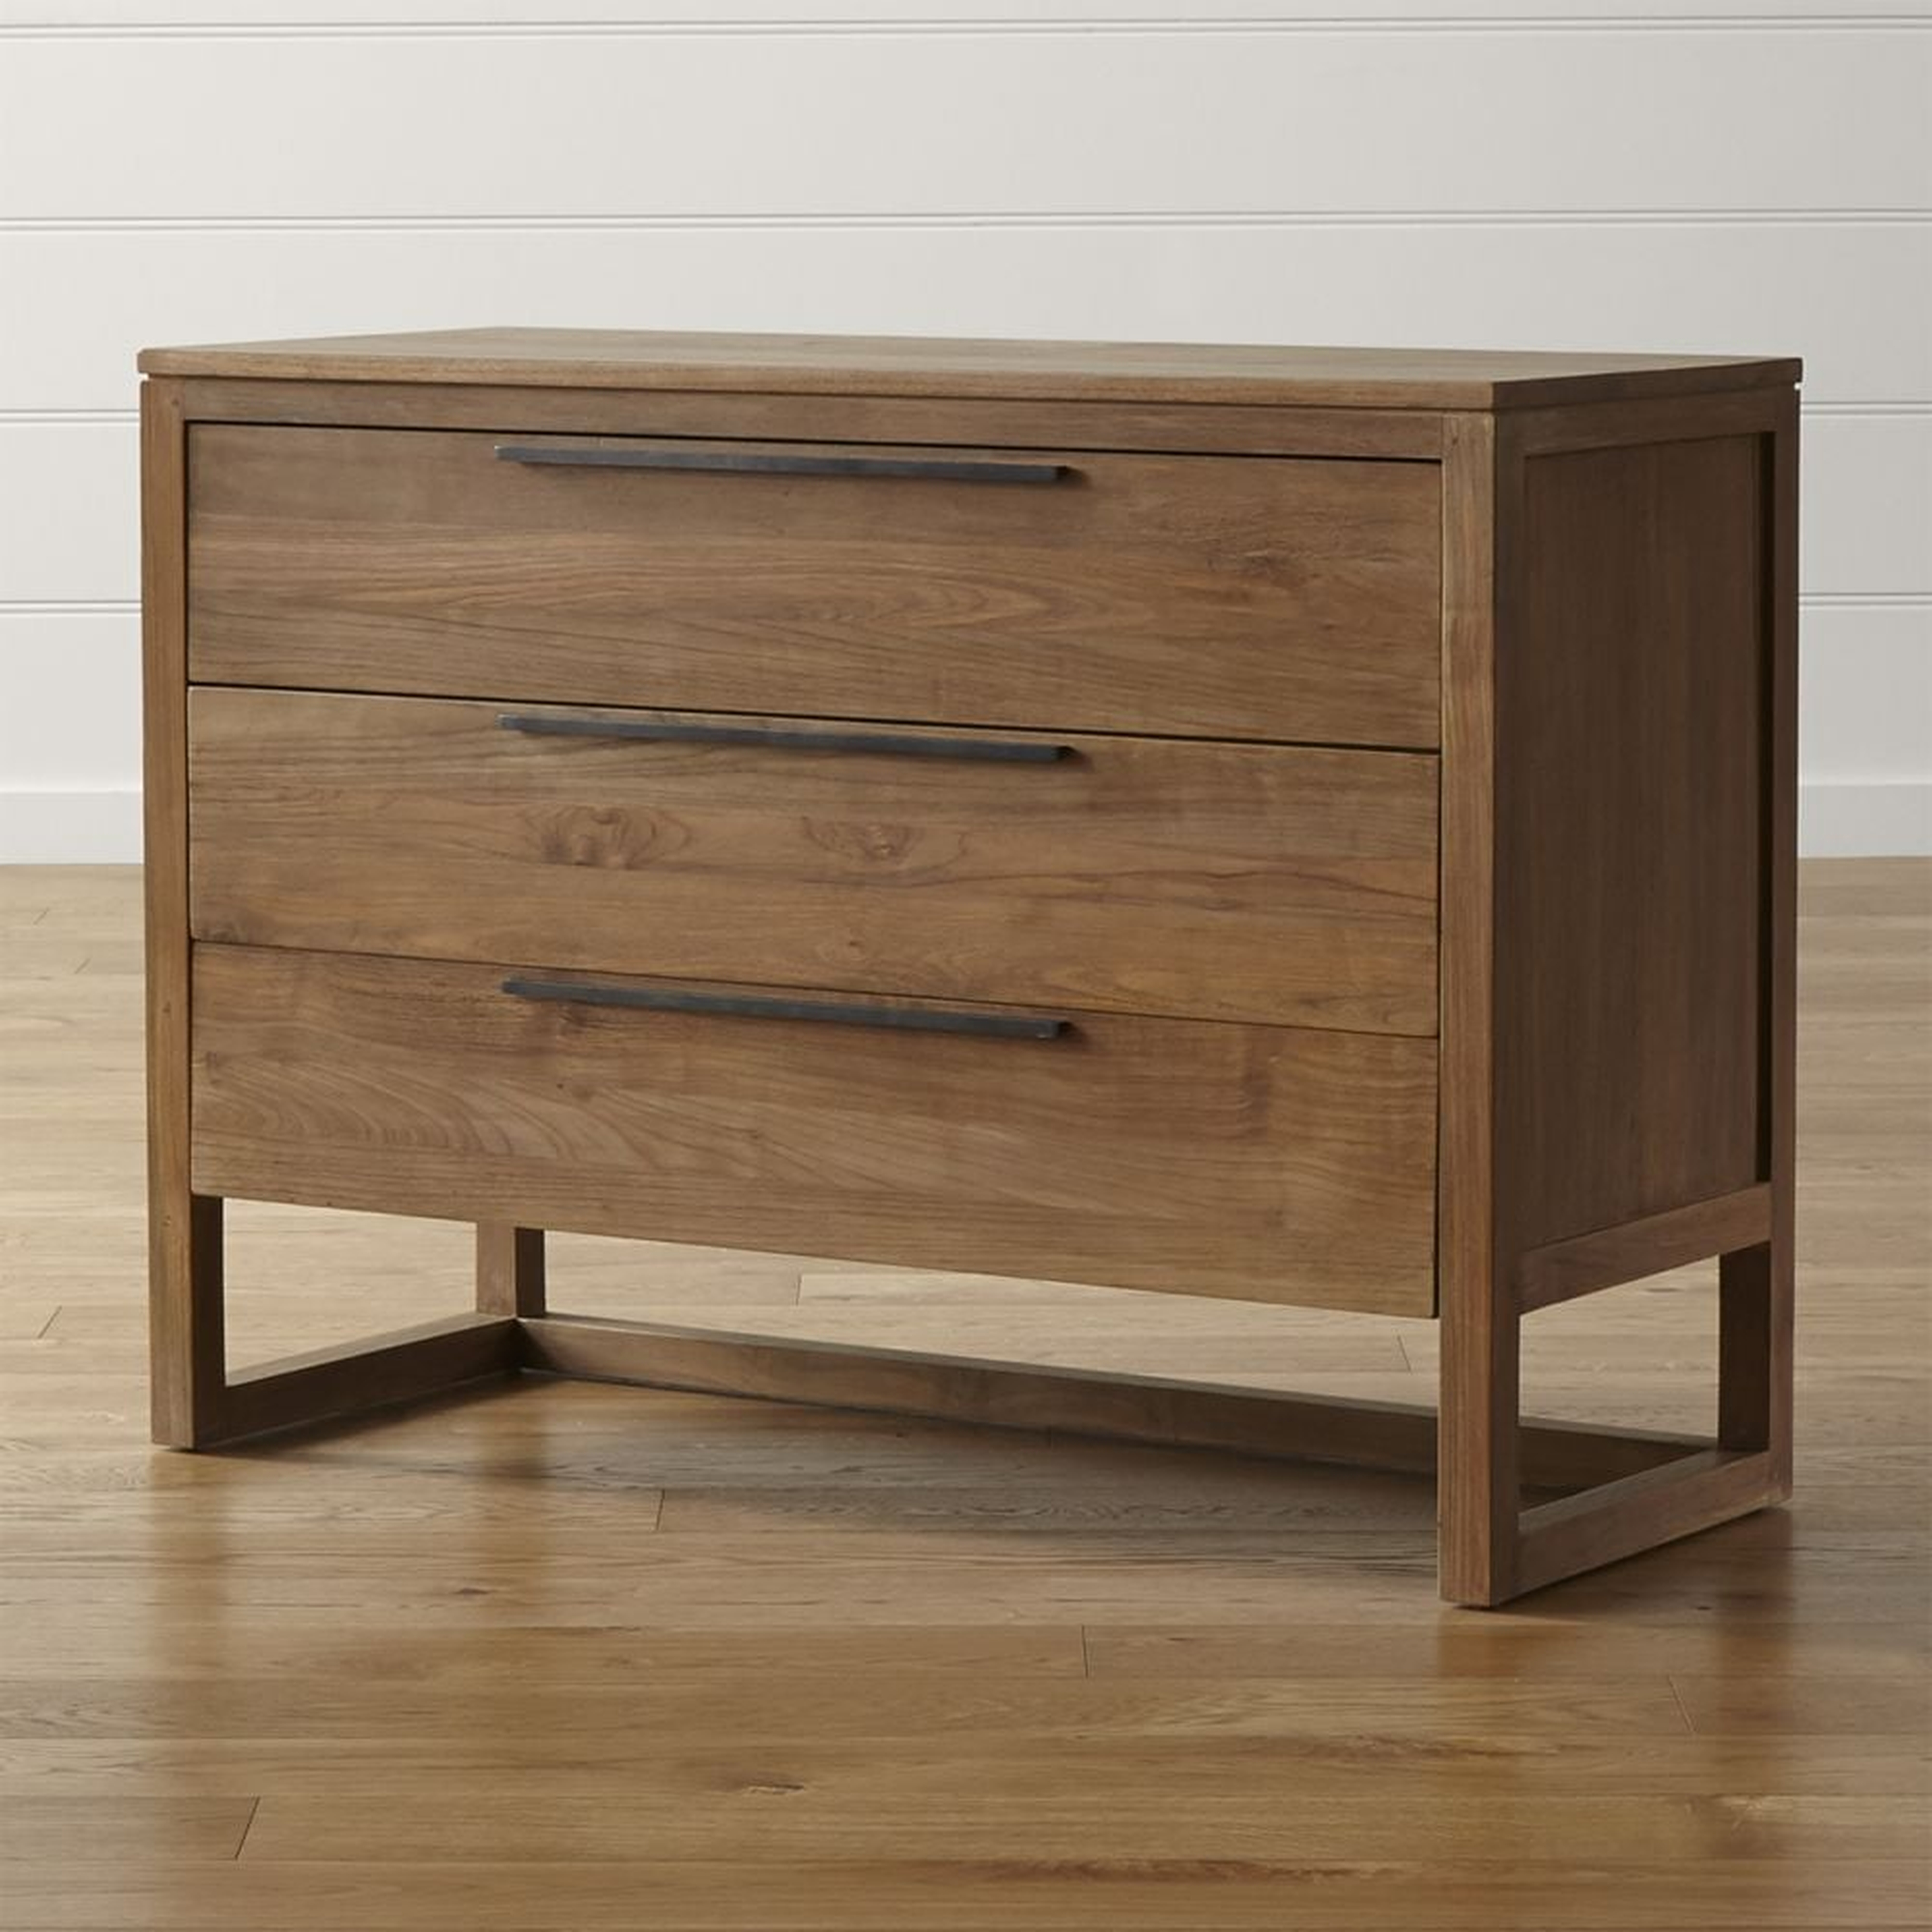 Linea Natural Teak Wood 3-Drawer Chest - Crate and Barrel